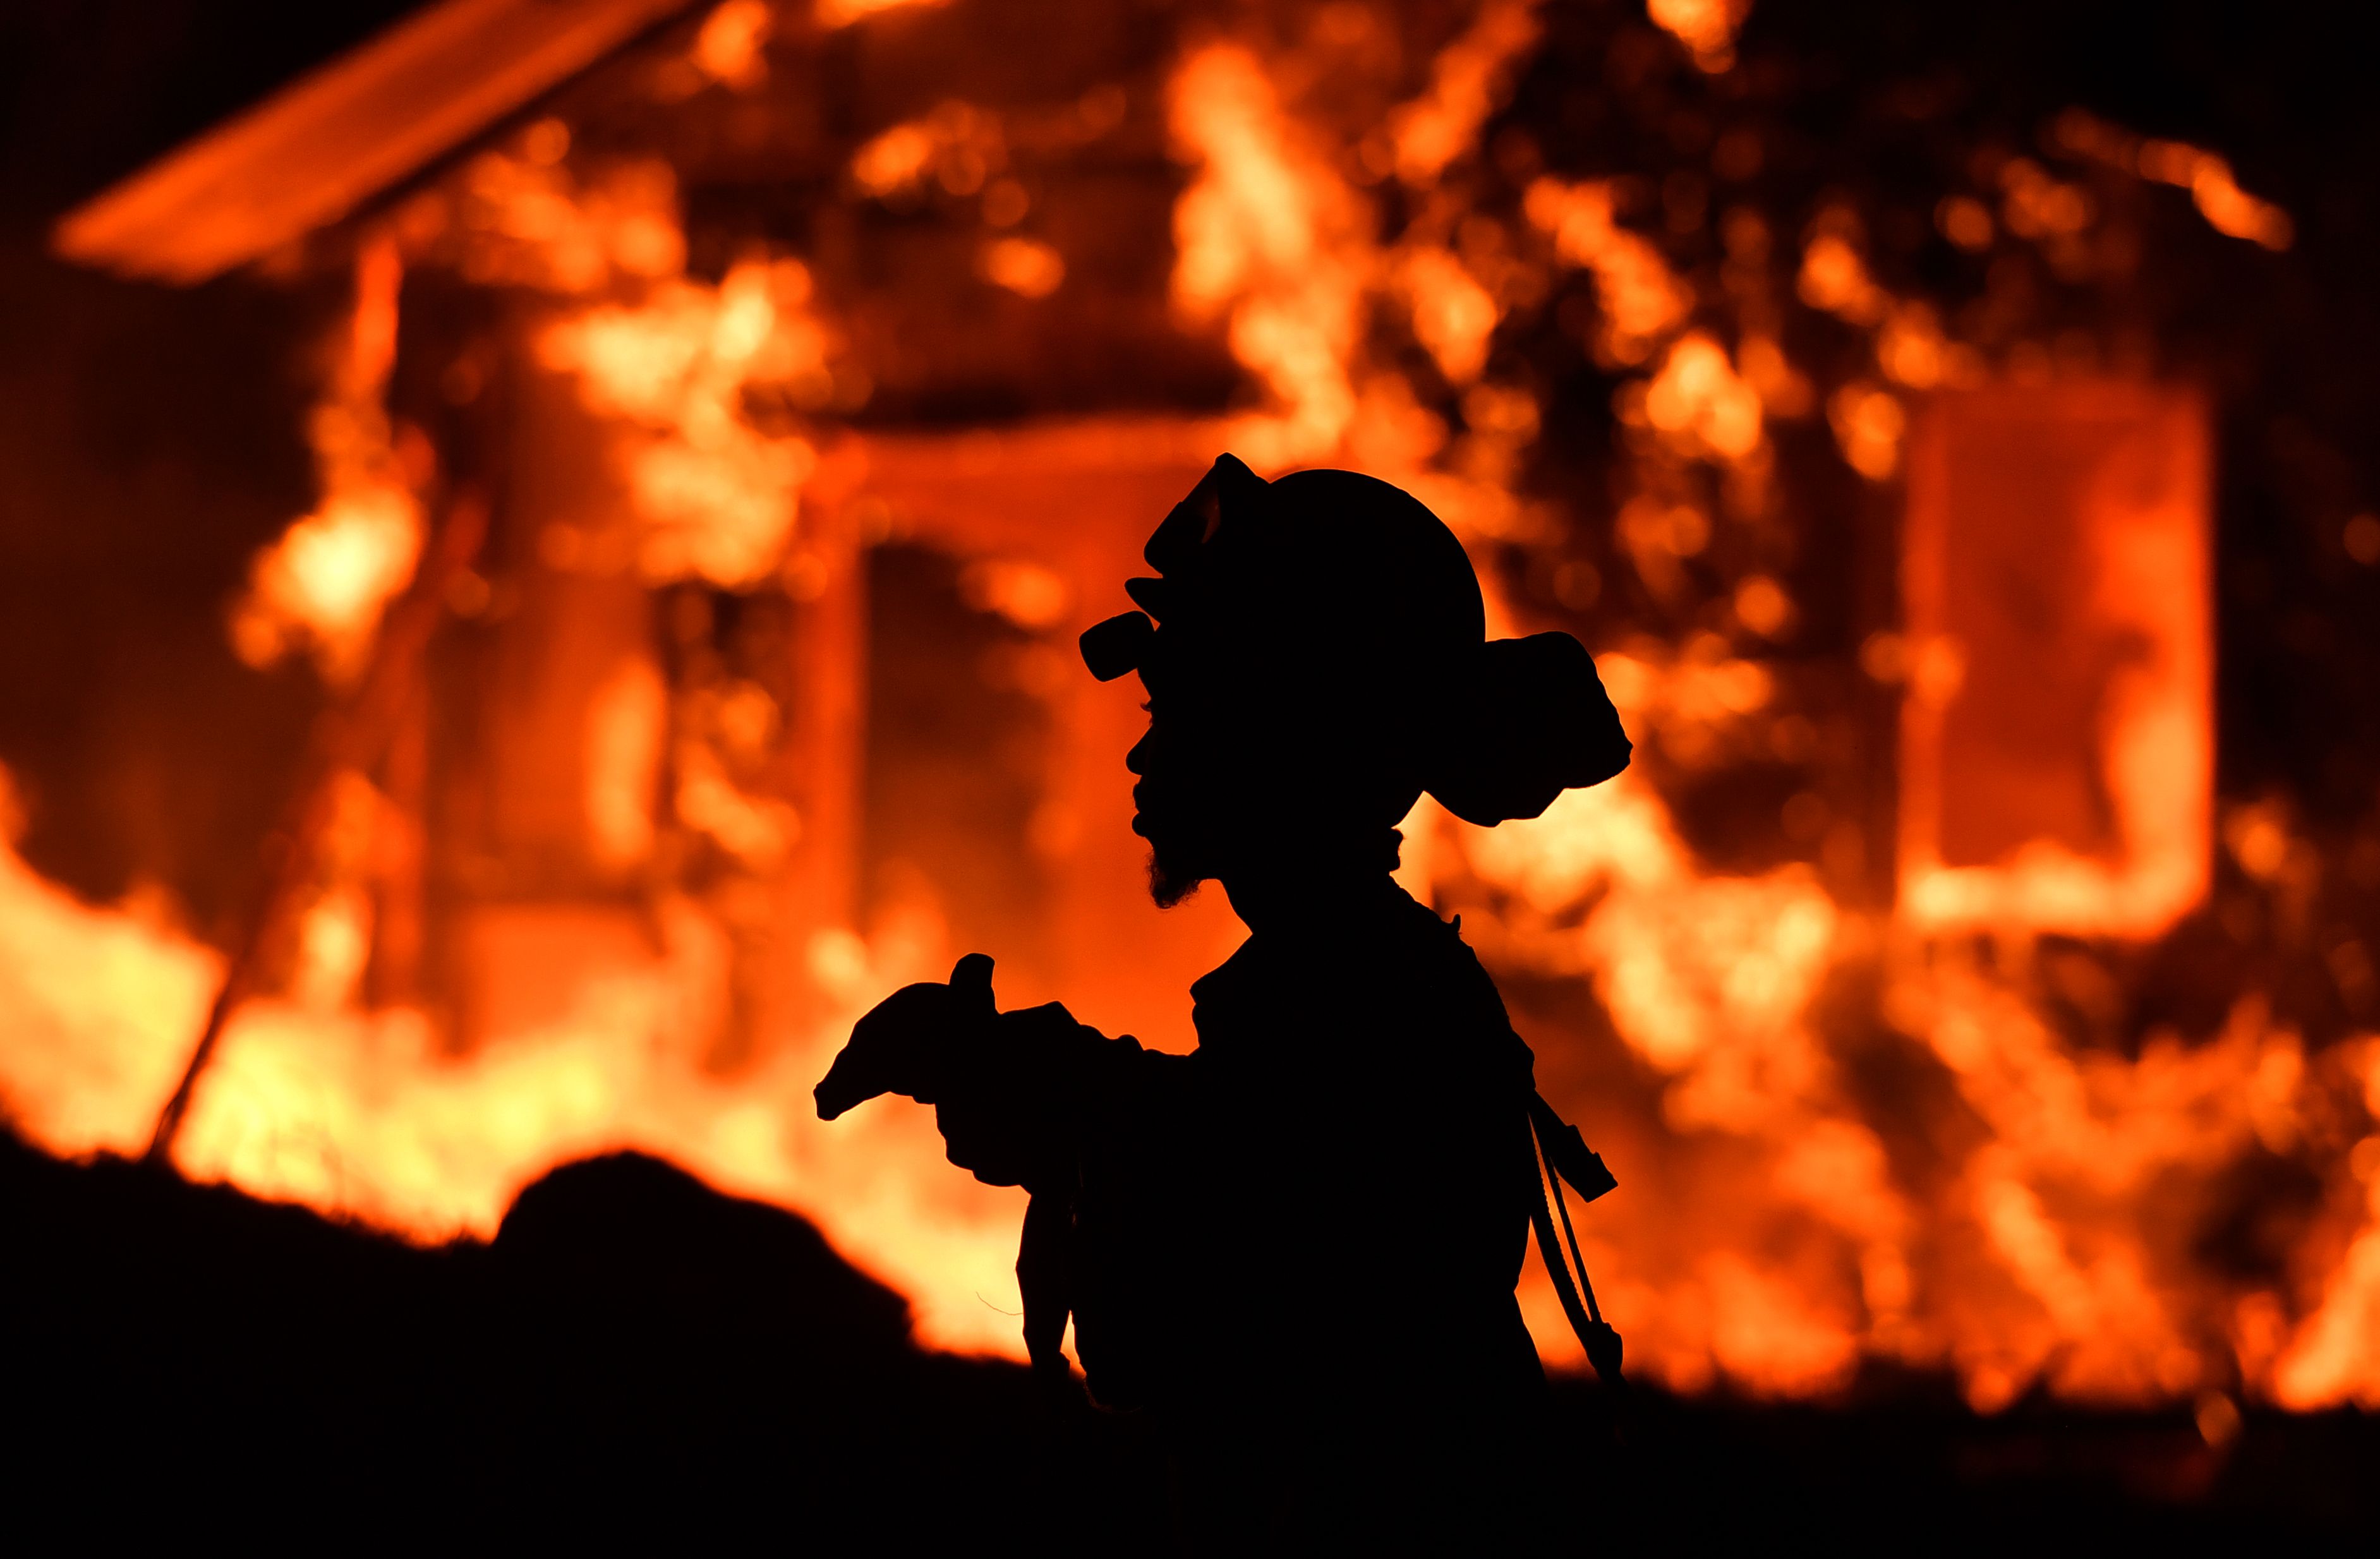 TOPSHOT - An inmate firefighter monitors flames as a house burns in the Napa wine region in California on October 9, 2017, as multiple wind-driven fires continue to whip through the region. (Credit: JOSH EDELSON/AFP/Getty Images)